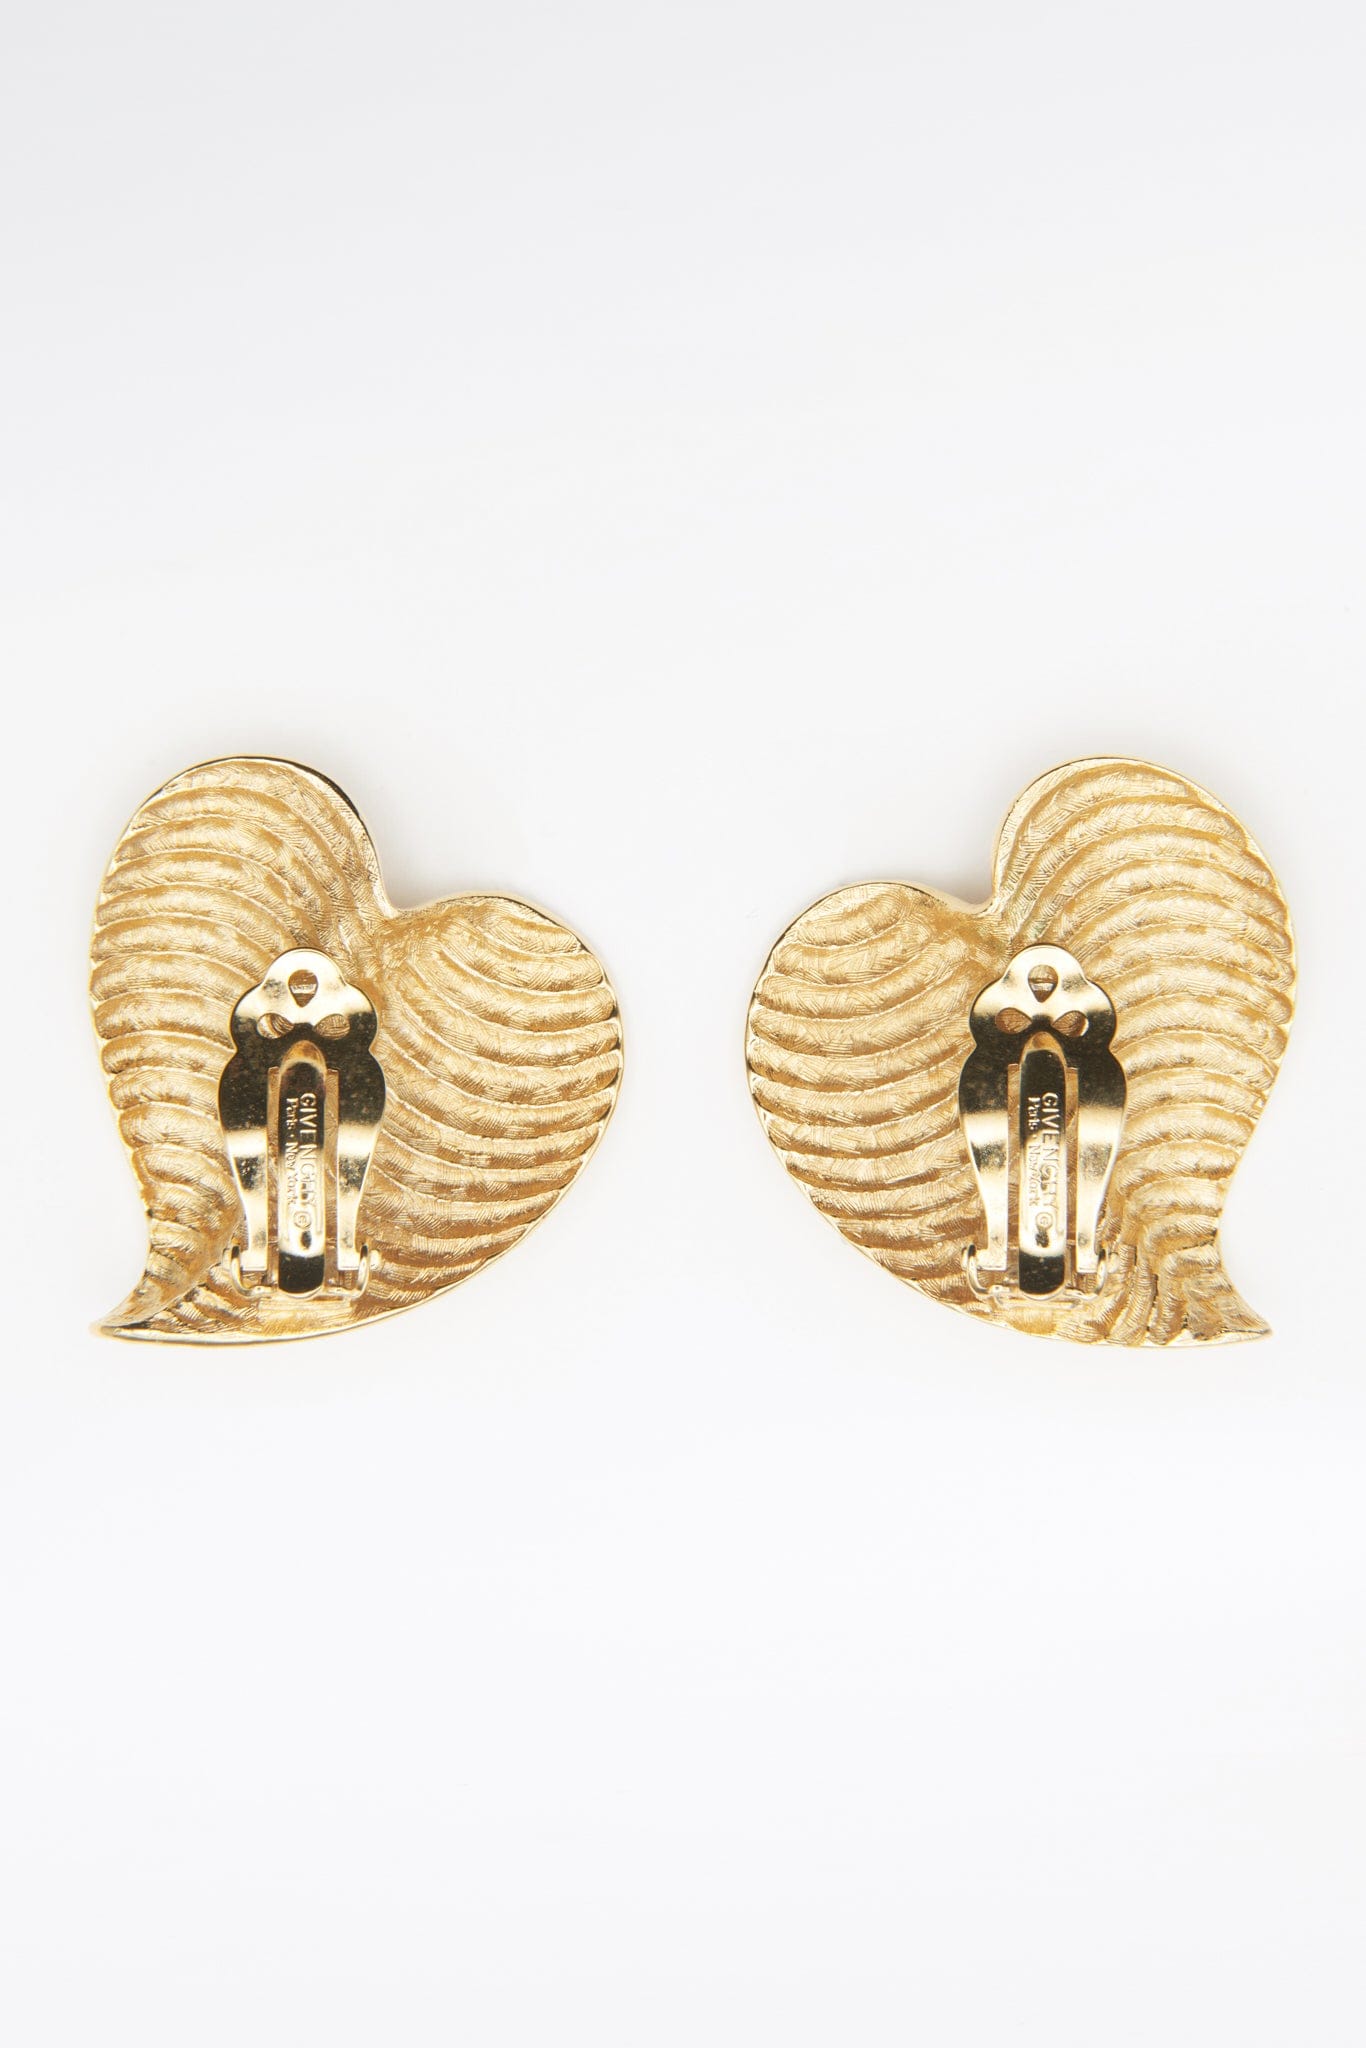 Vintage Gold Givenchy Heart Leaf Earrings